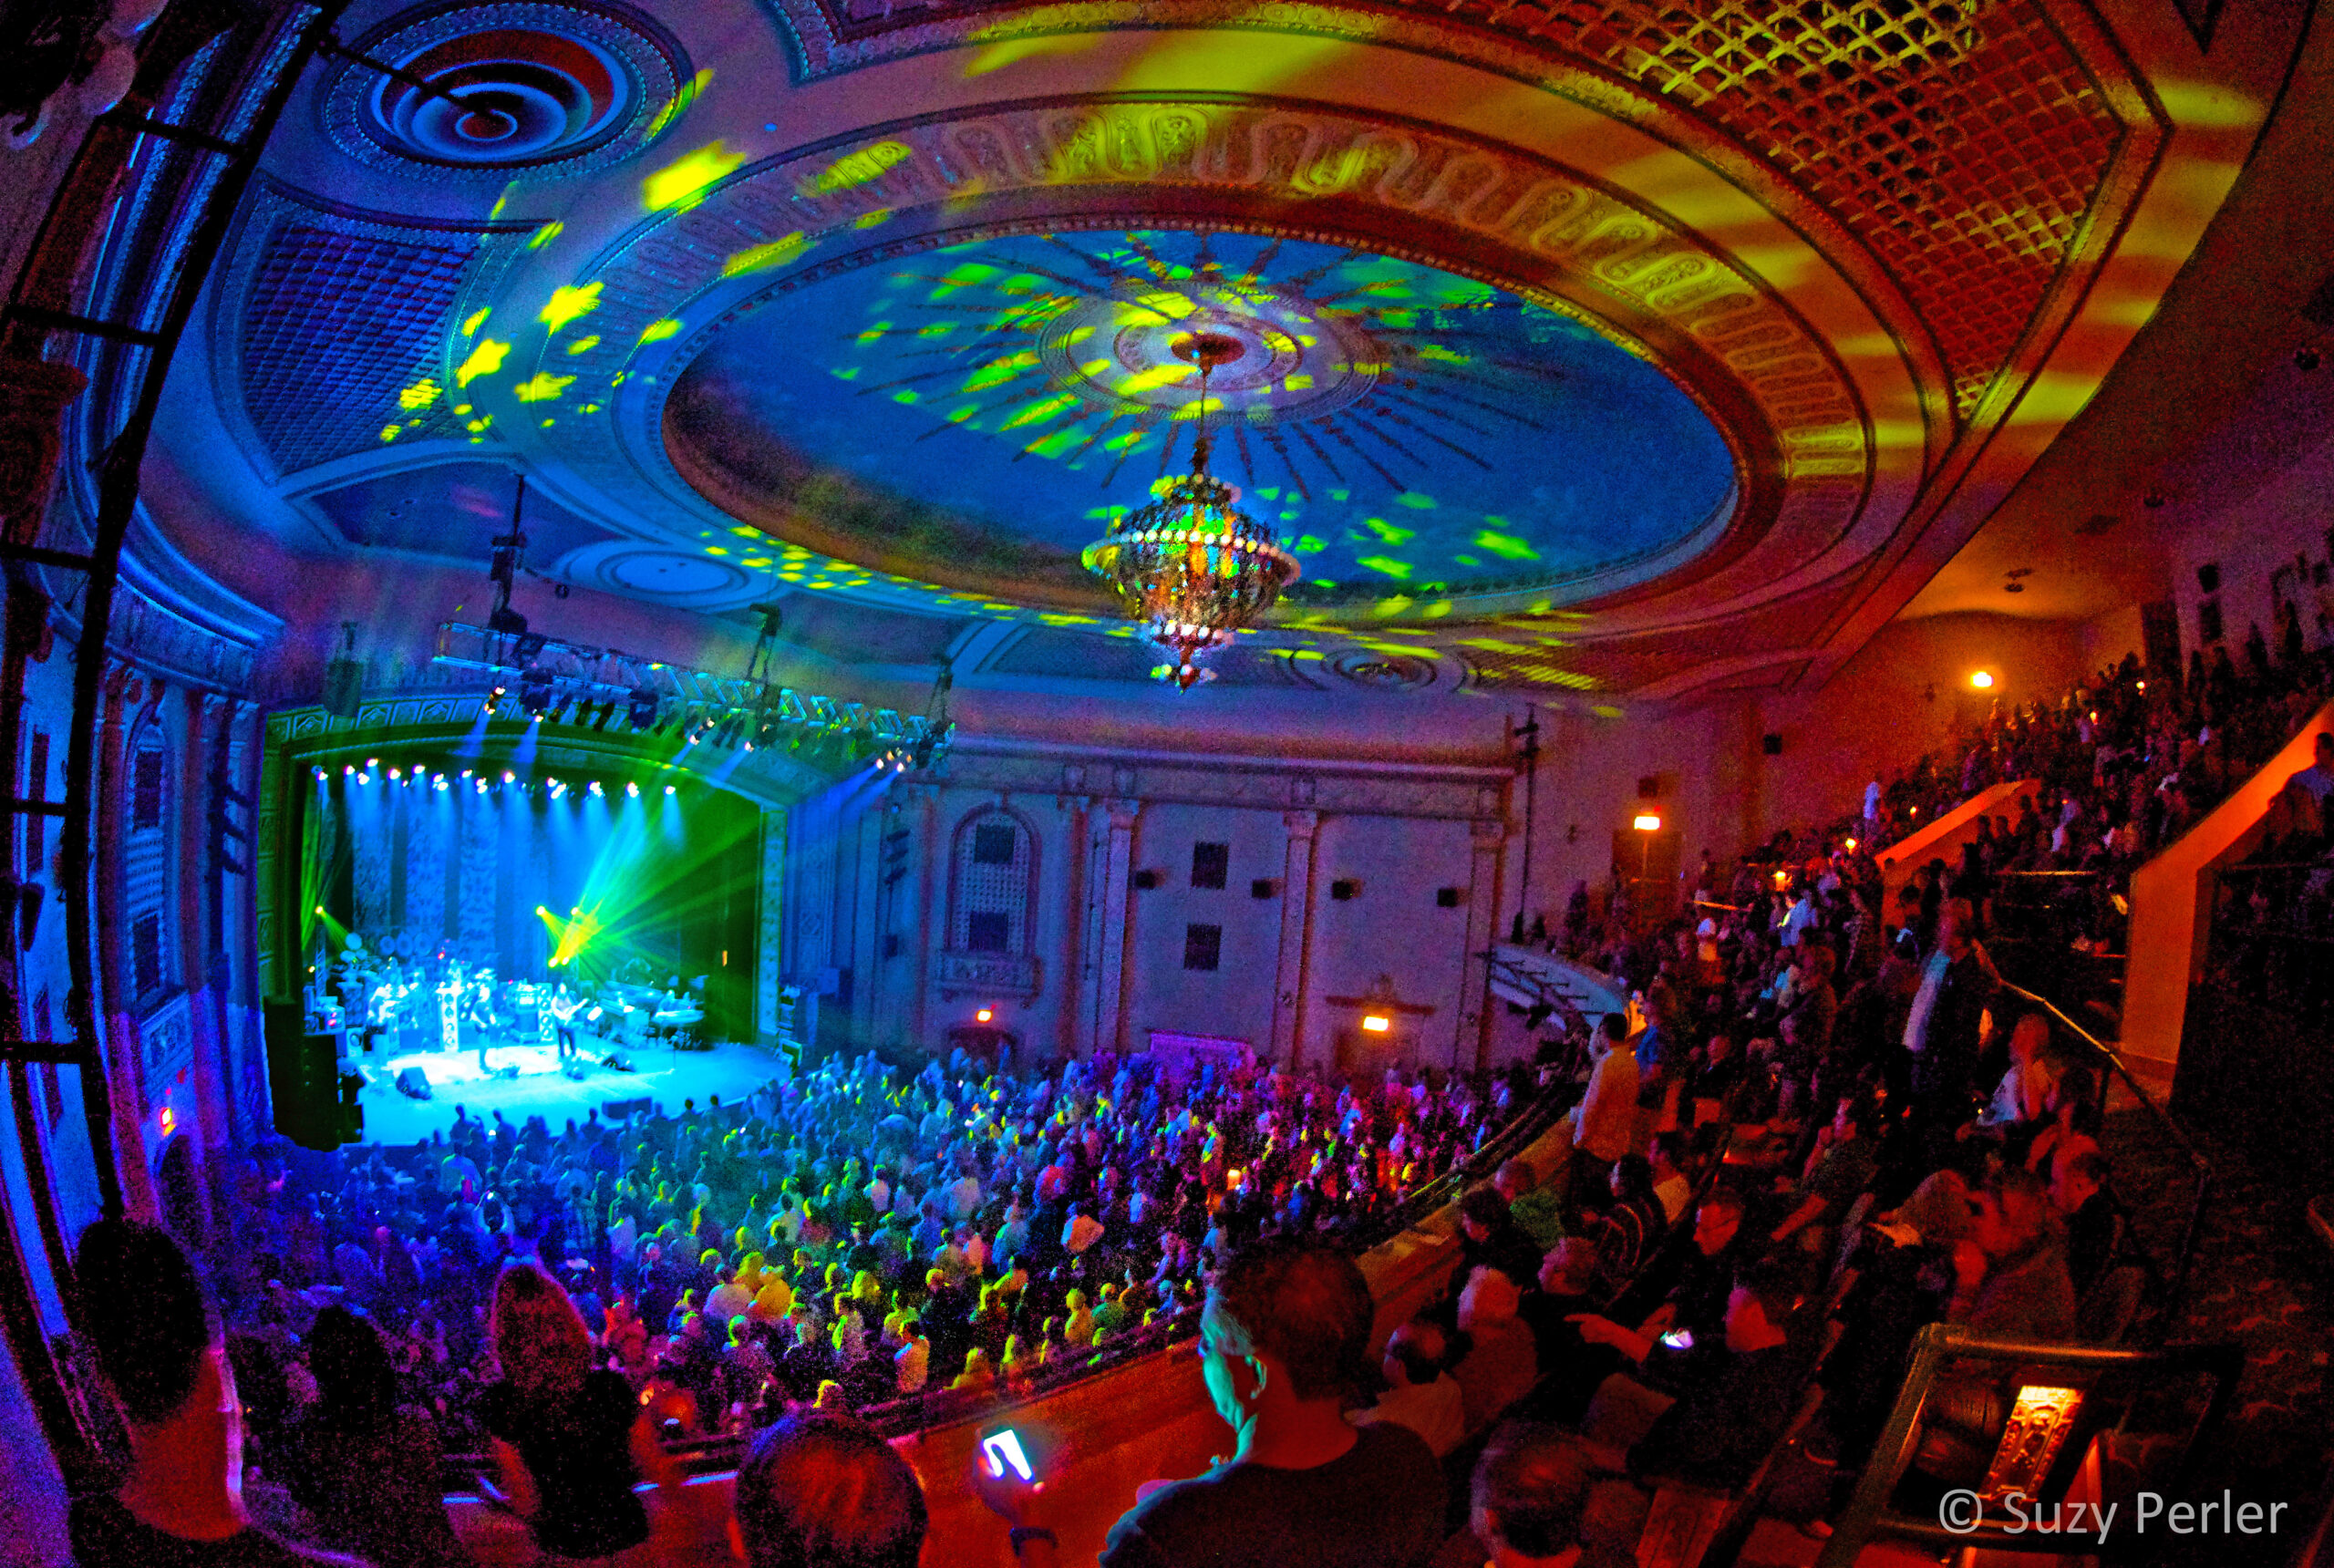 Dark Star Orchestra live at the Count Basie Theater, Red Bank, New Jersey. © SUZY PERLER